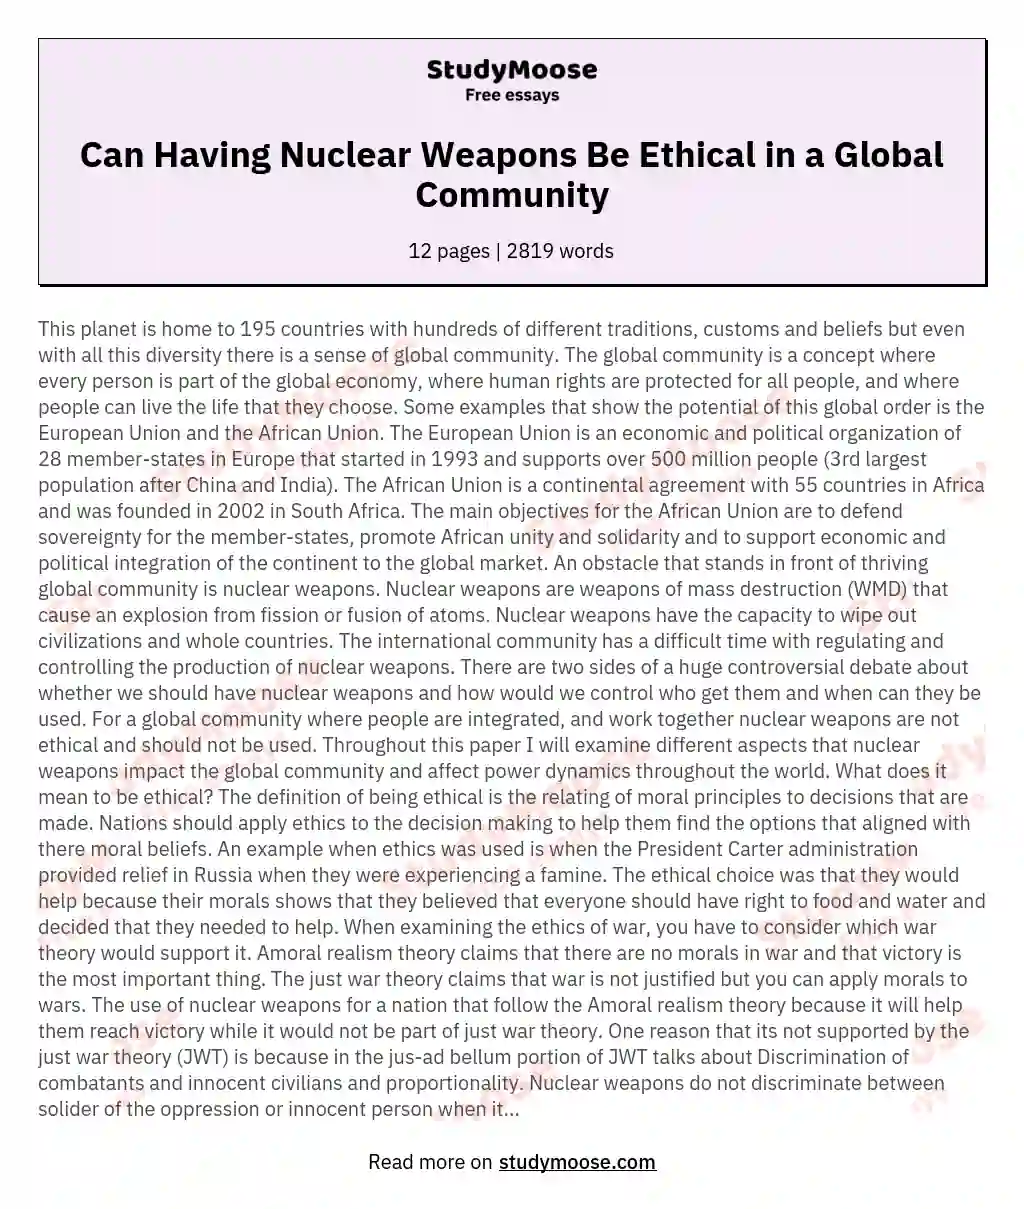 Can Having Nuclear Weapons Be Ethical in a Global Community essay